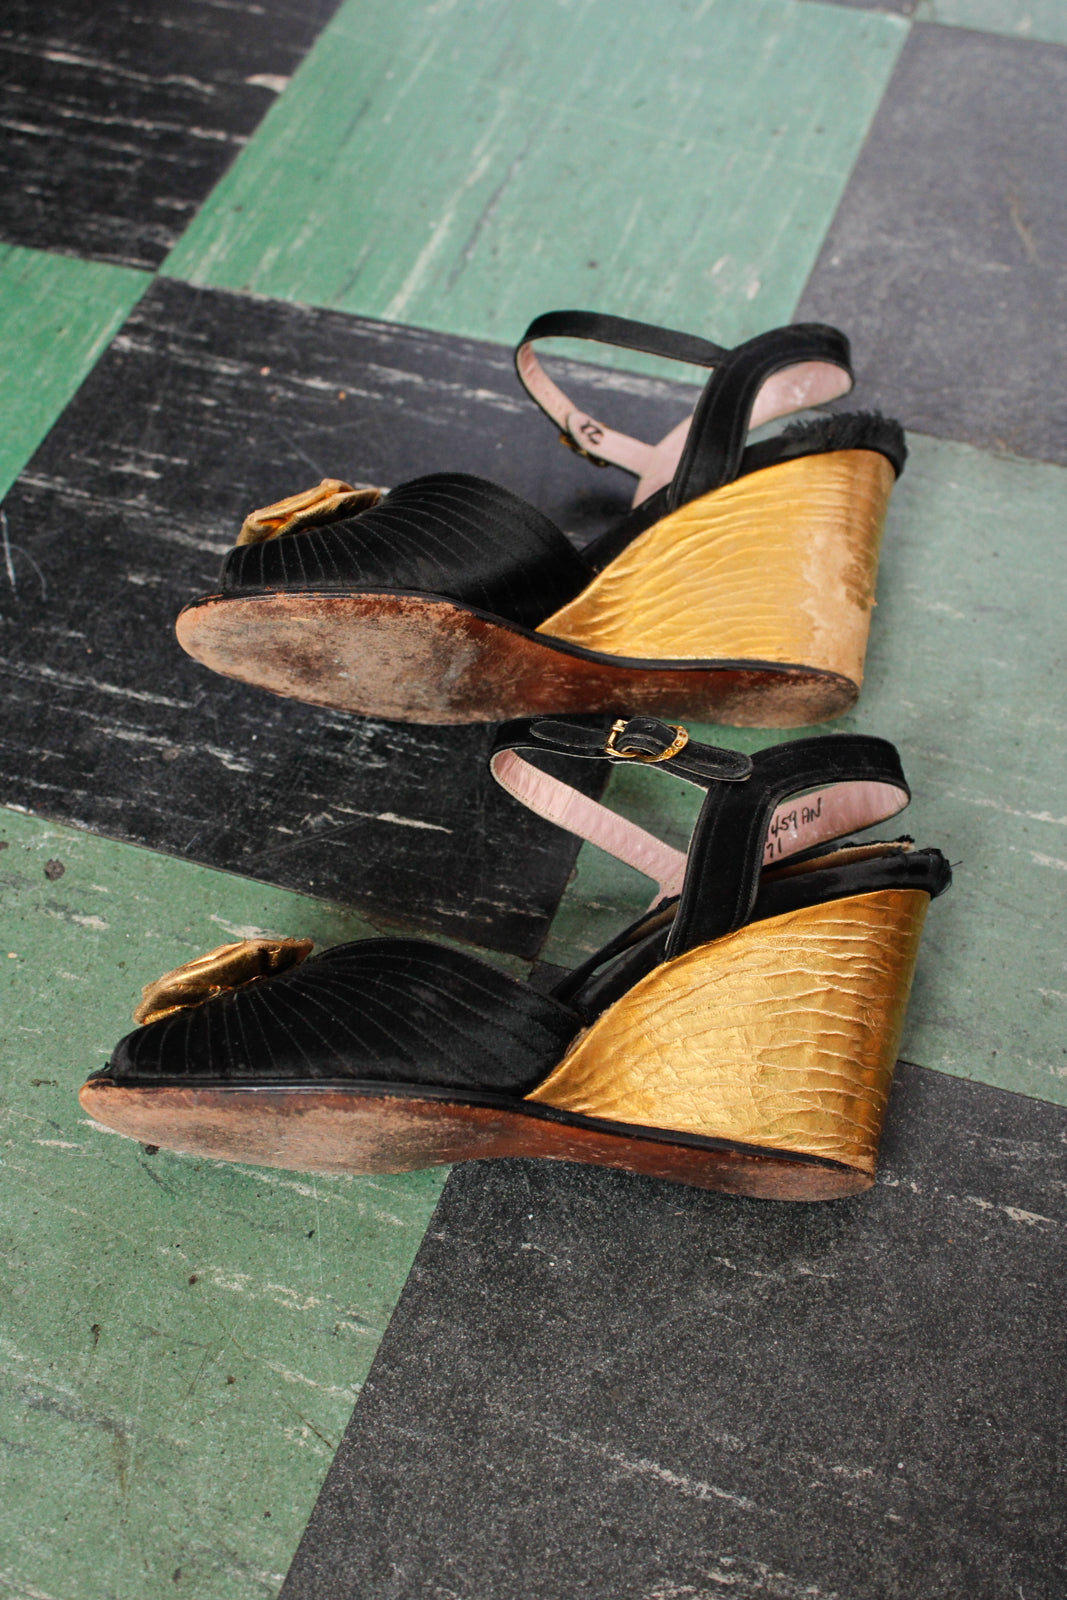 1940s Gold Silk and Leather Wedges - 5.5M